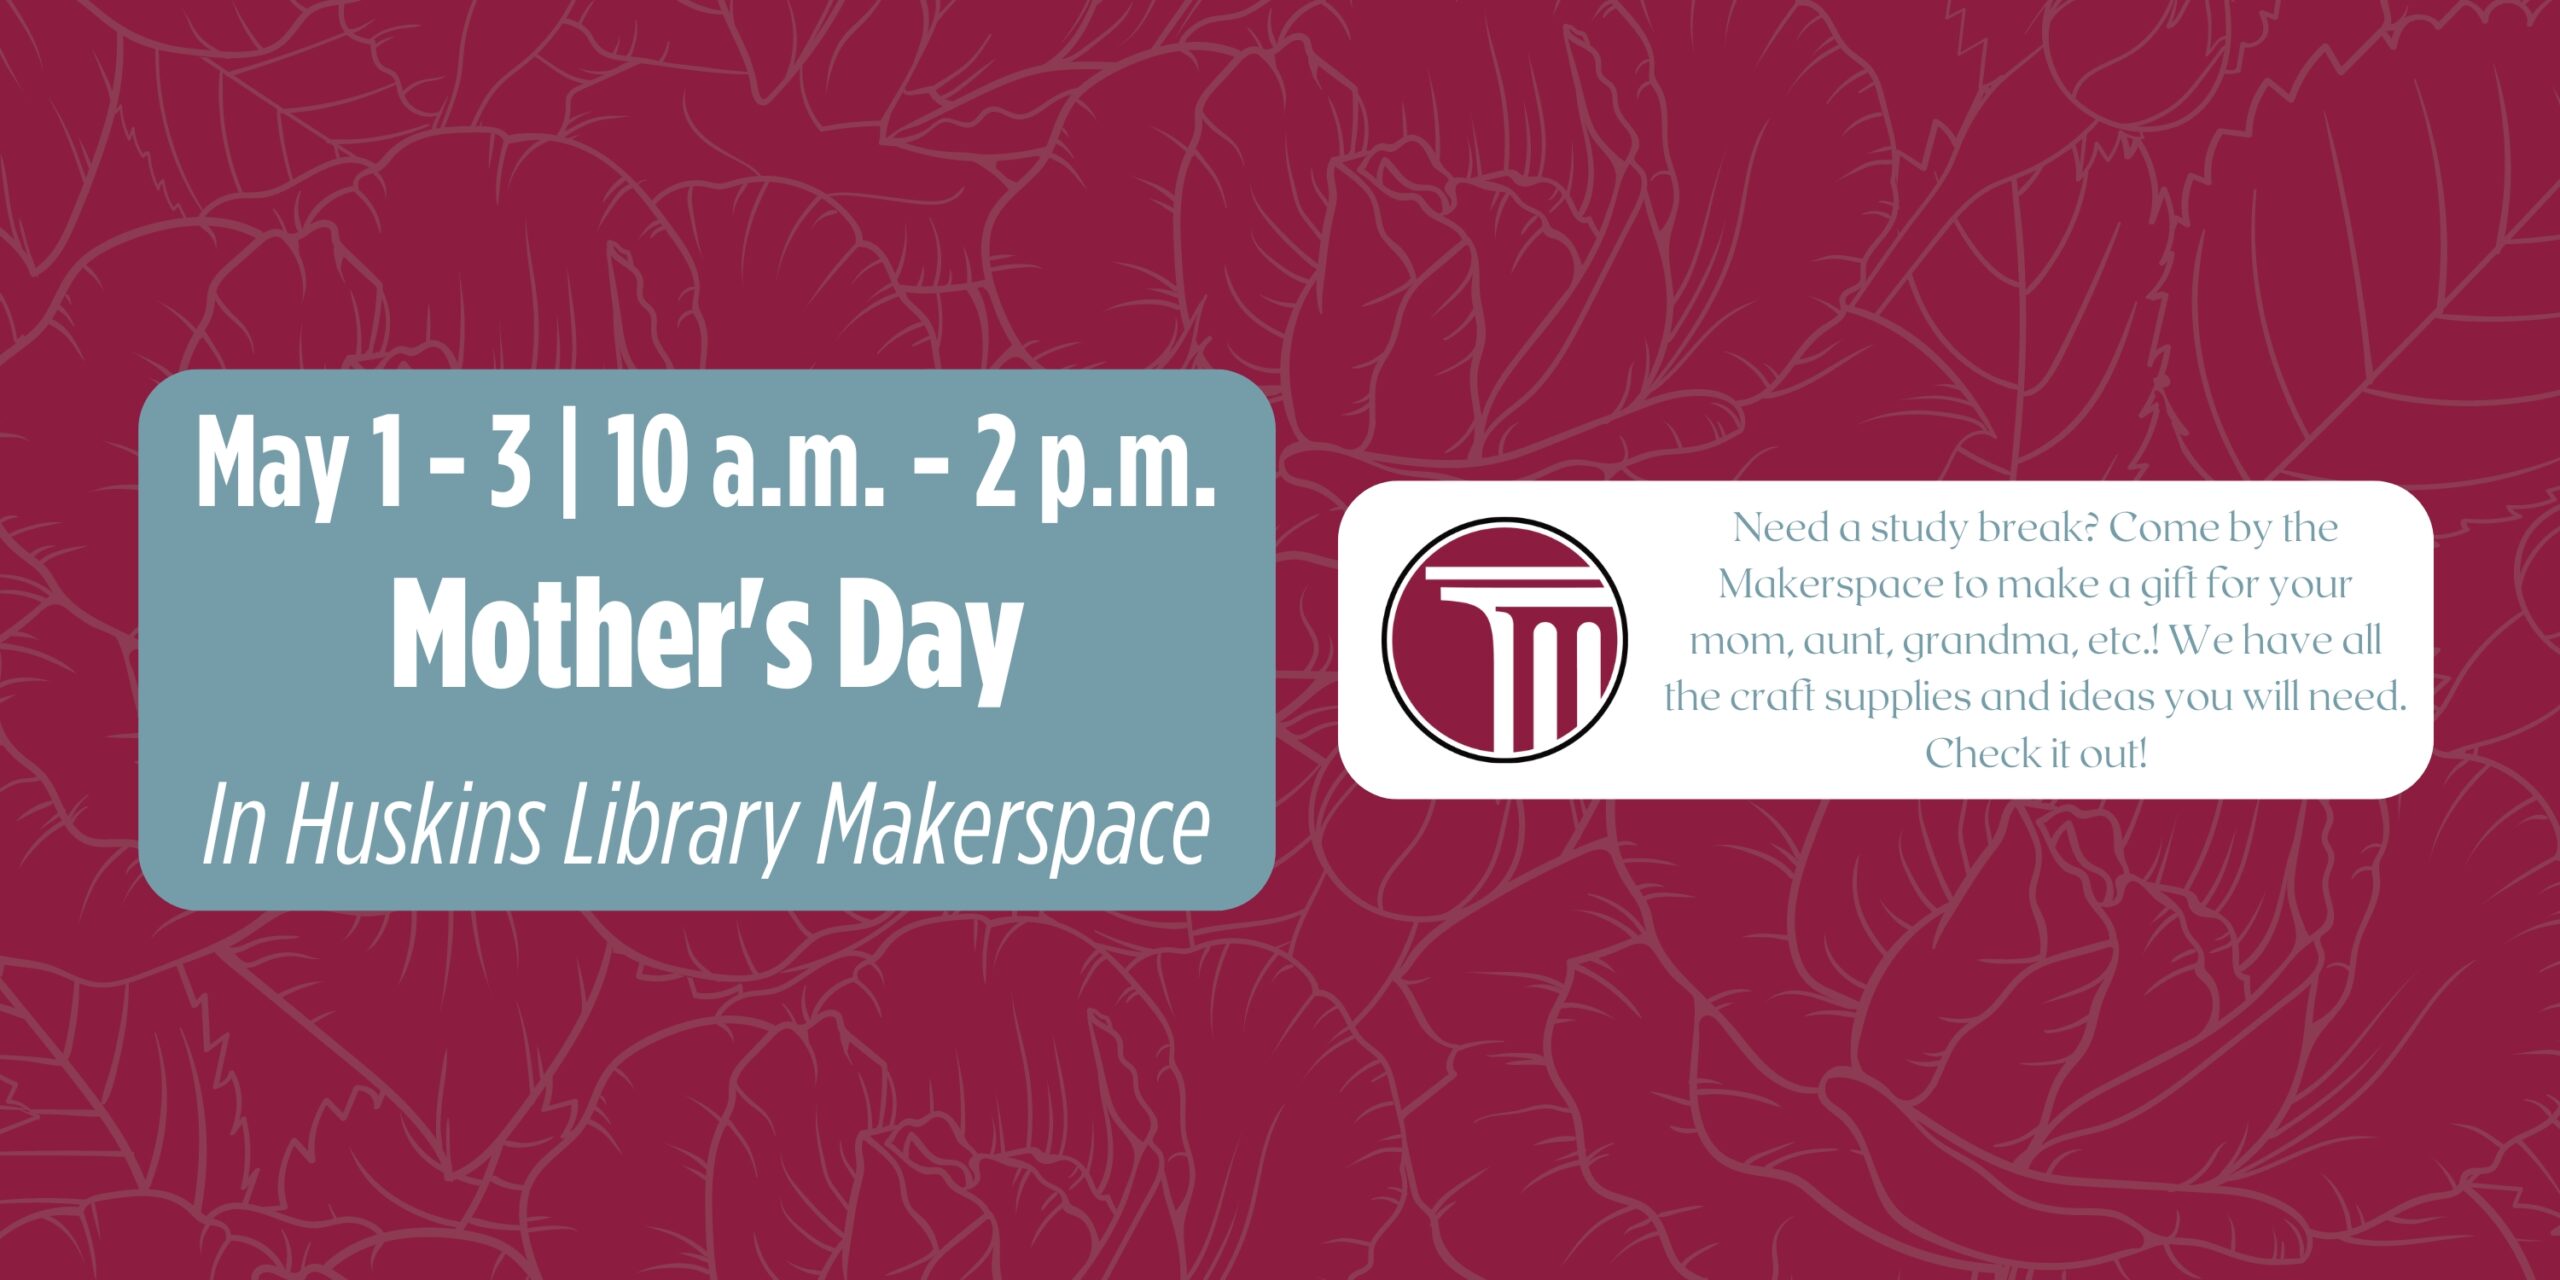 Banner that reads "May 1-3 | 10 a.m. - 2 p.m. | Mother's Day | In Huskins Library Makerspace | Come by the Makerspace to make a gift for your mom, aunt, grandma, etc.! We have all the craft supplies and ideas you will need. Check it out!".